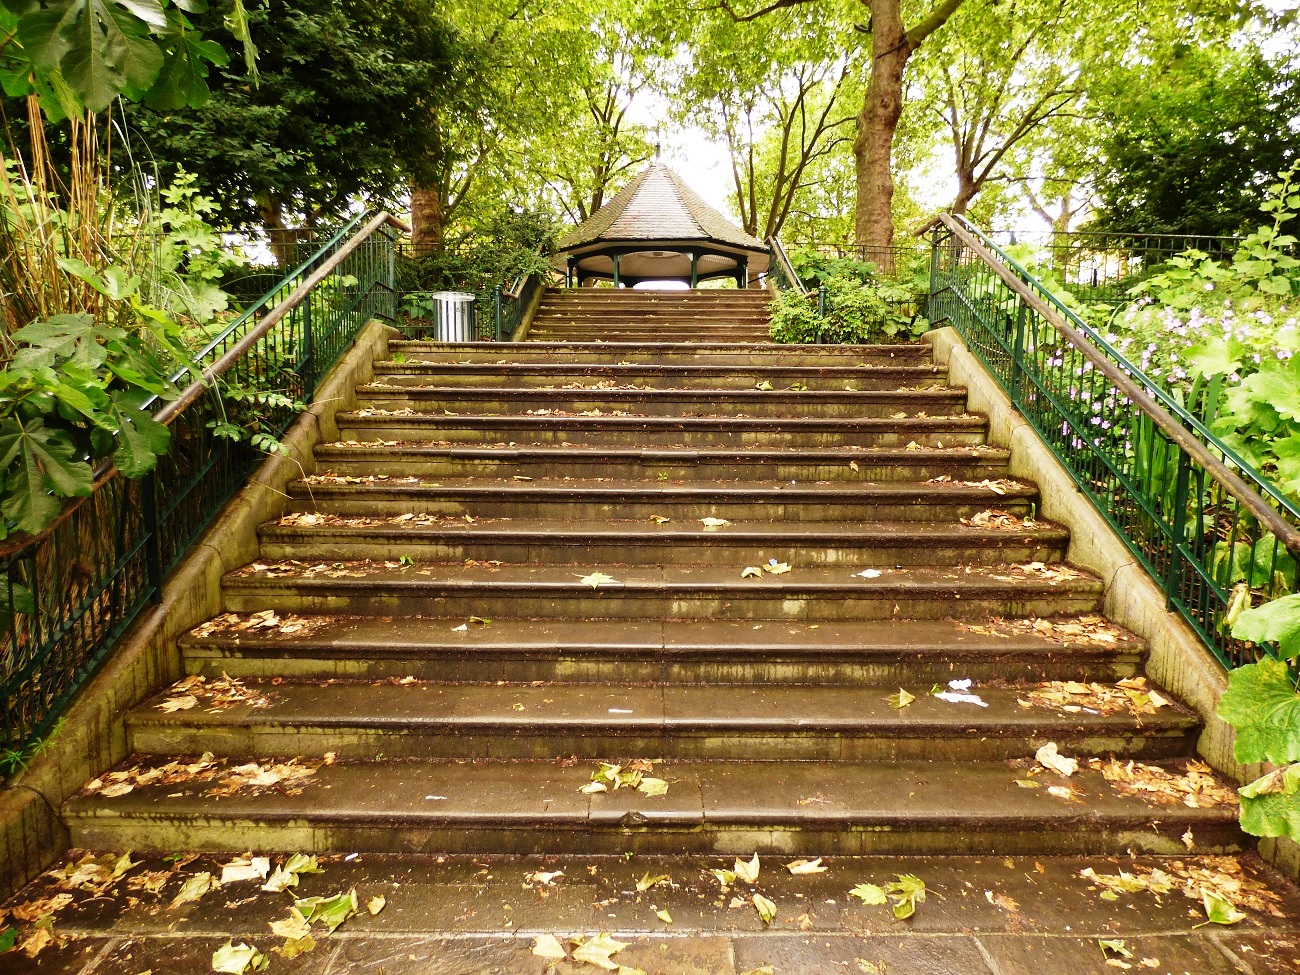 20160613_Tower-Hamlets_Boundary-Gardens-Arnold-Circus_Stairway-to-Bandstand